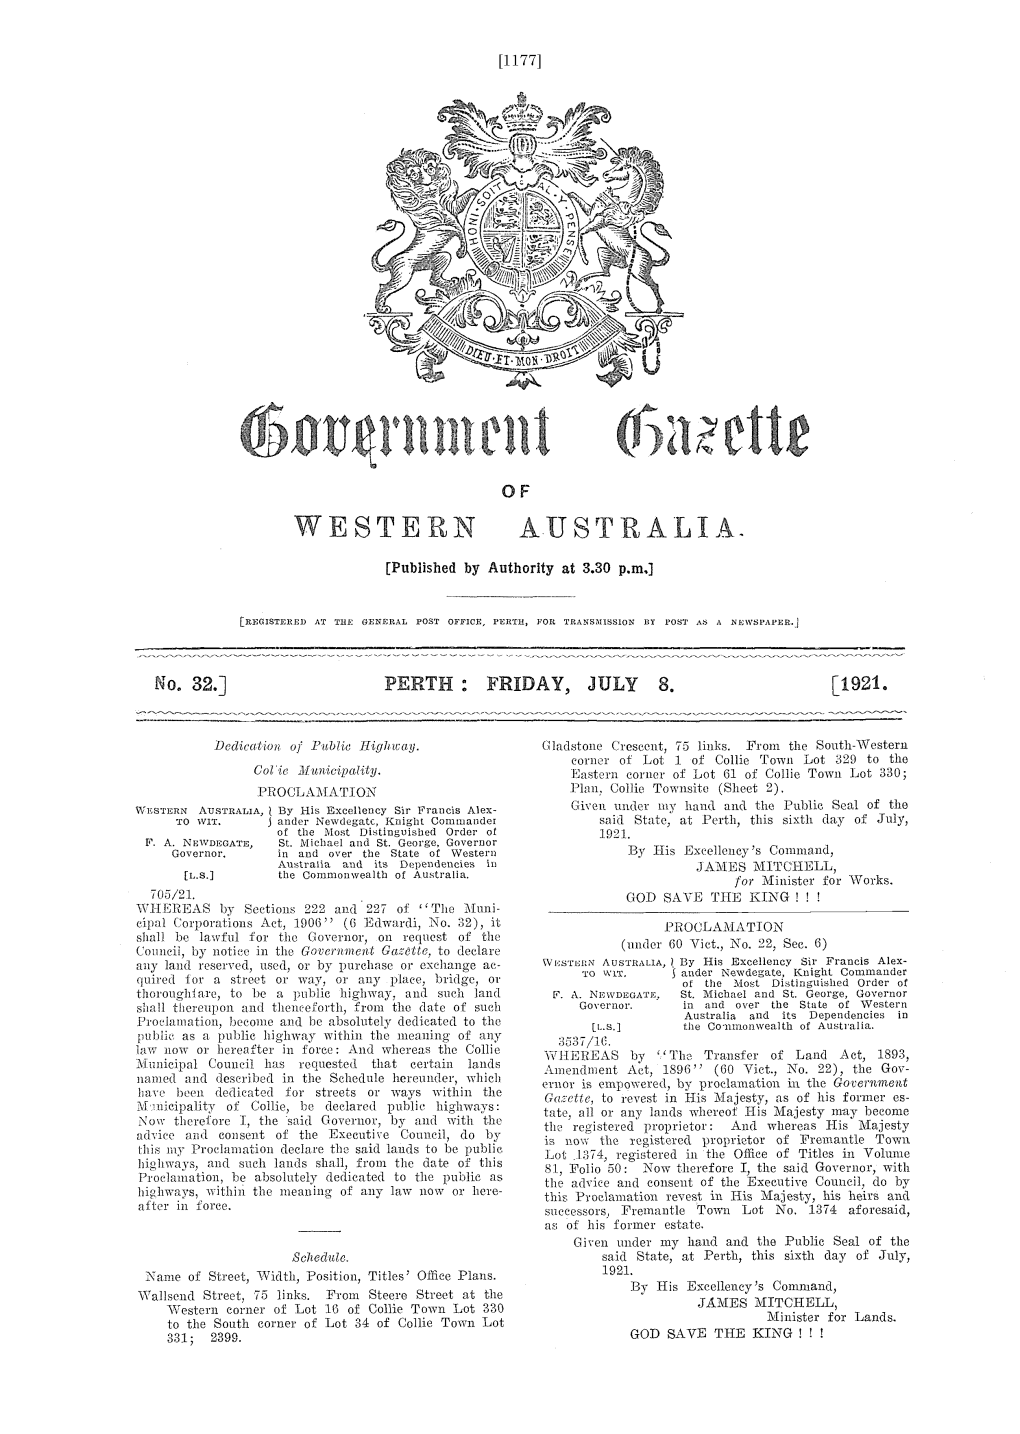 WESTERN AUSTRALIA [Published by Authority at 3.30 P.M.]